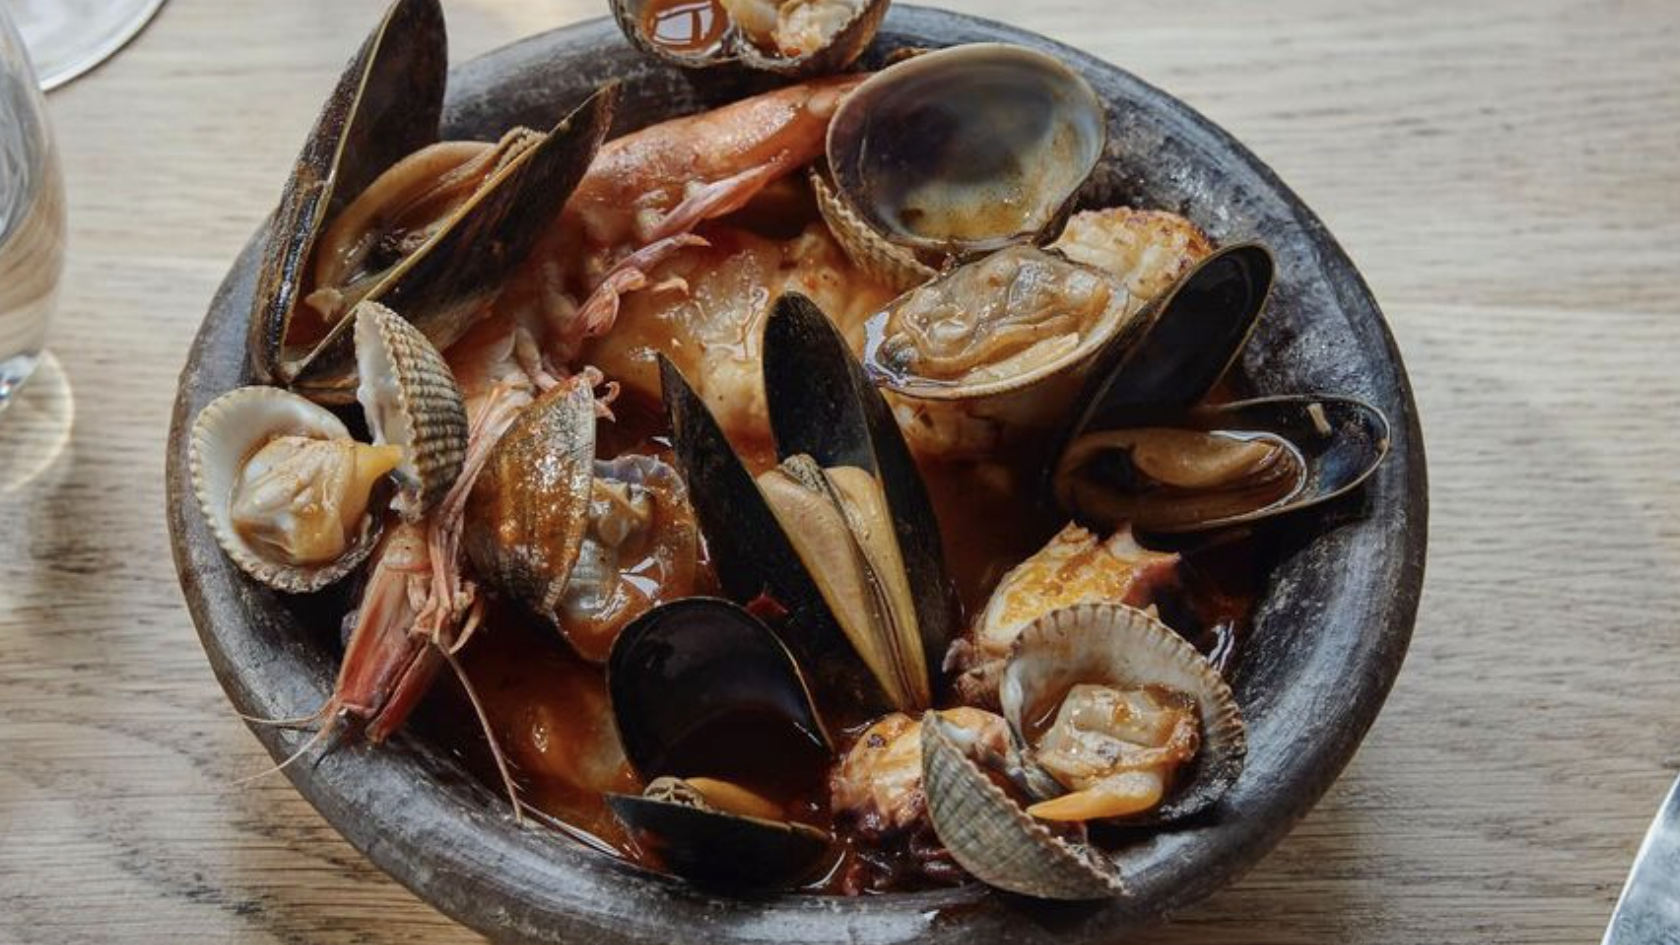 Sicilian seafood stew from Morchella in Clerkenwell, East London. Photo: Instagram